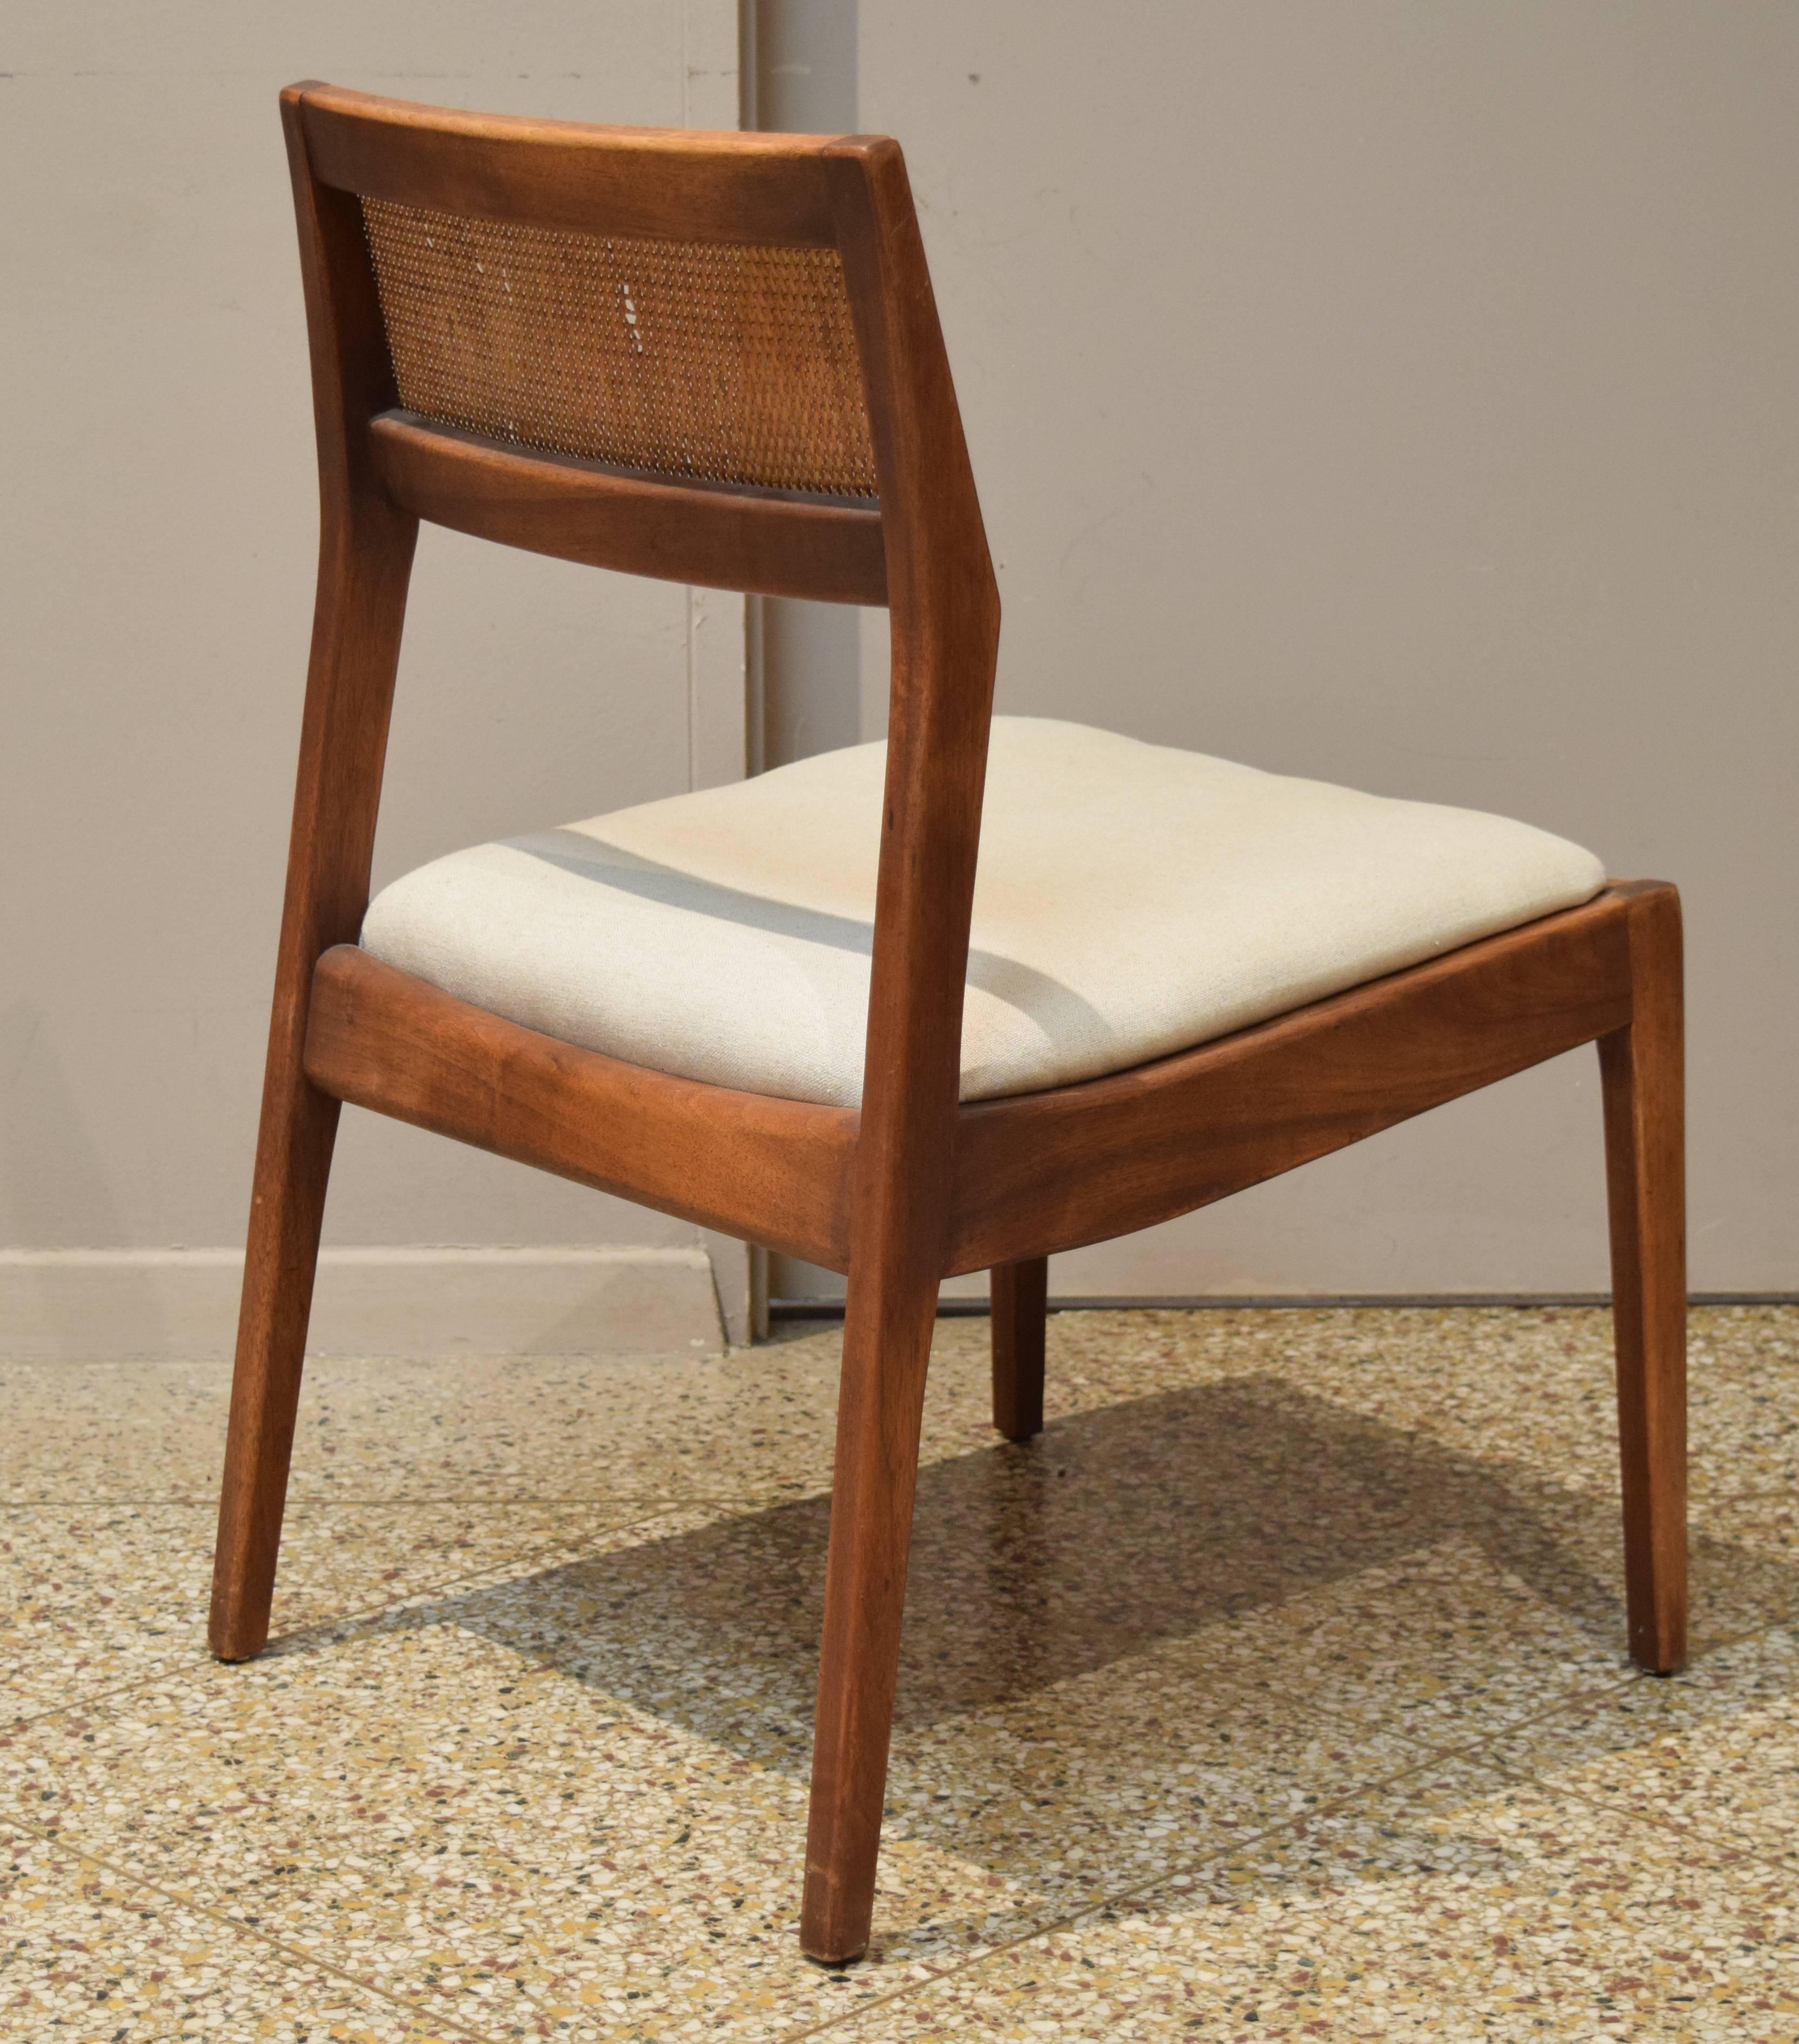 Mid-20th Century Jens Risom Chair For Sale